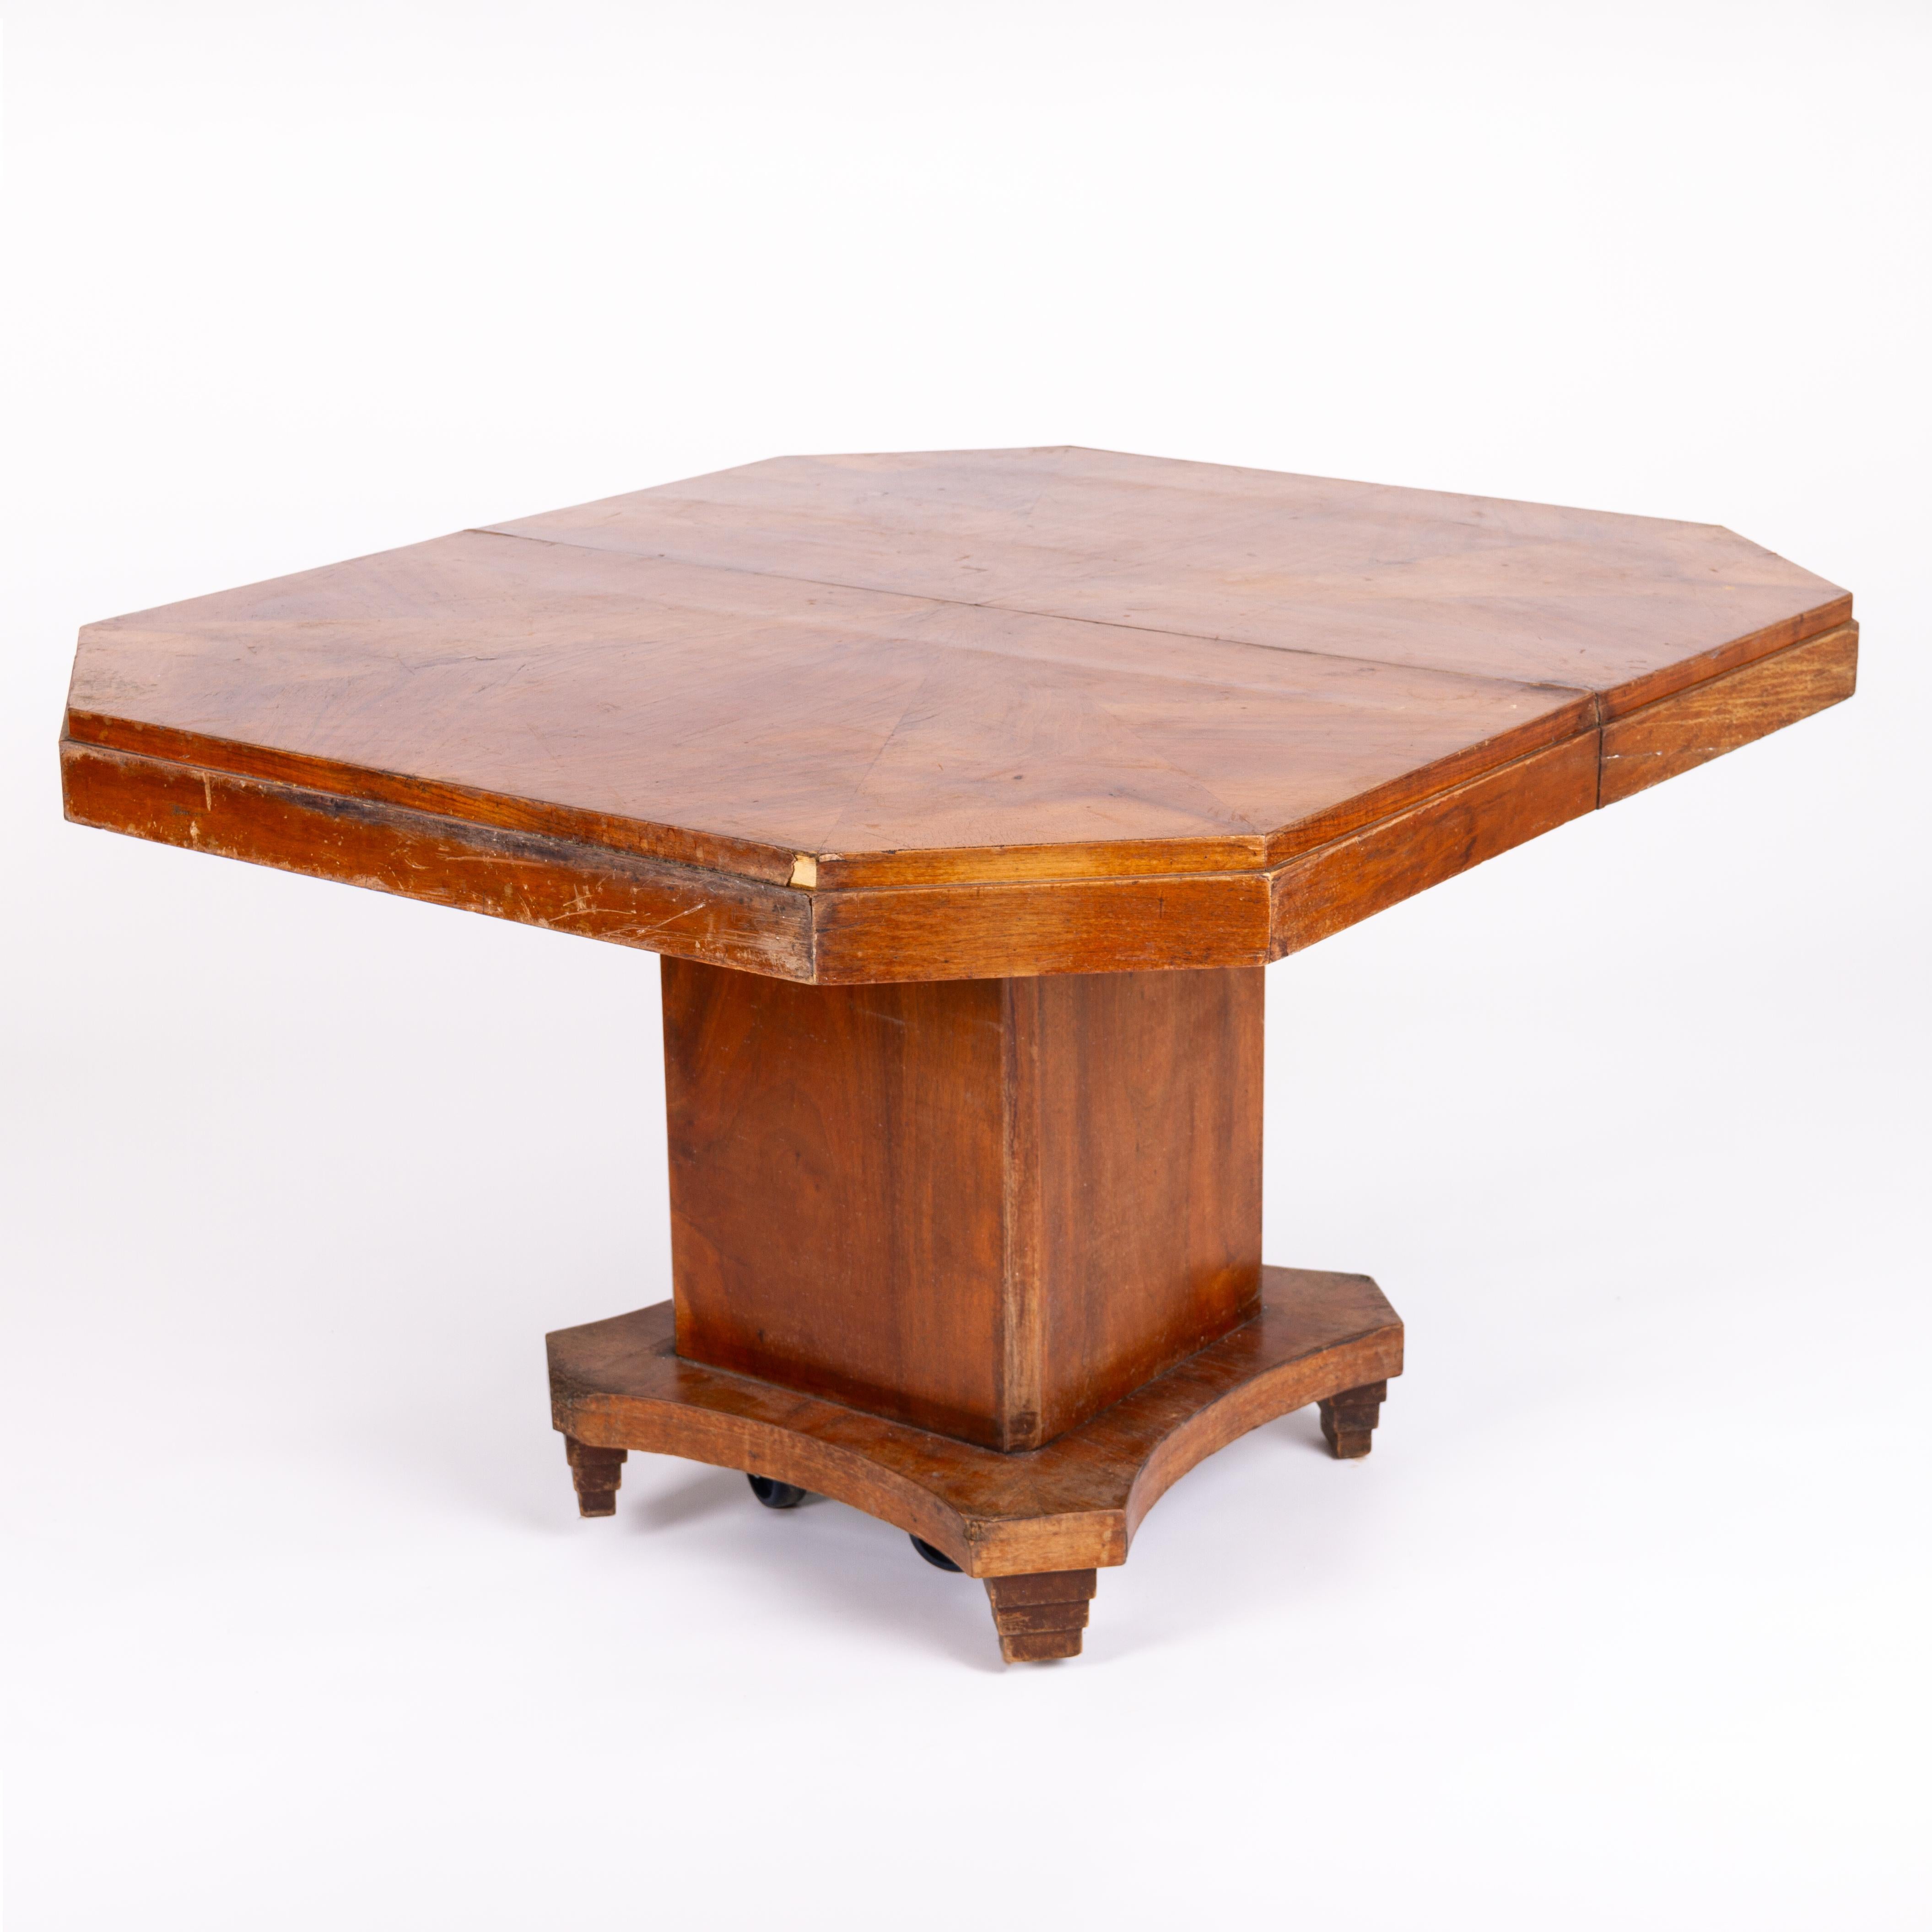 20th Century Art Deco Mahogany Dining Table 1930s For Sale